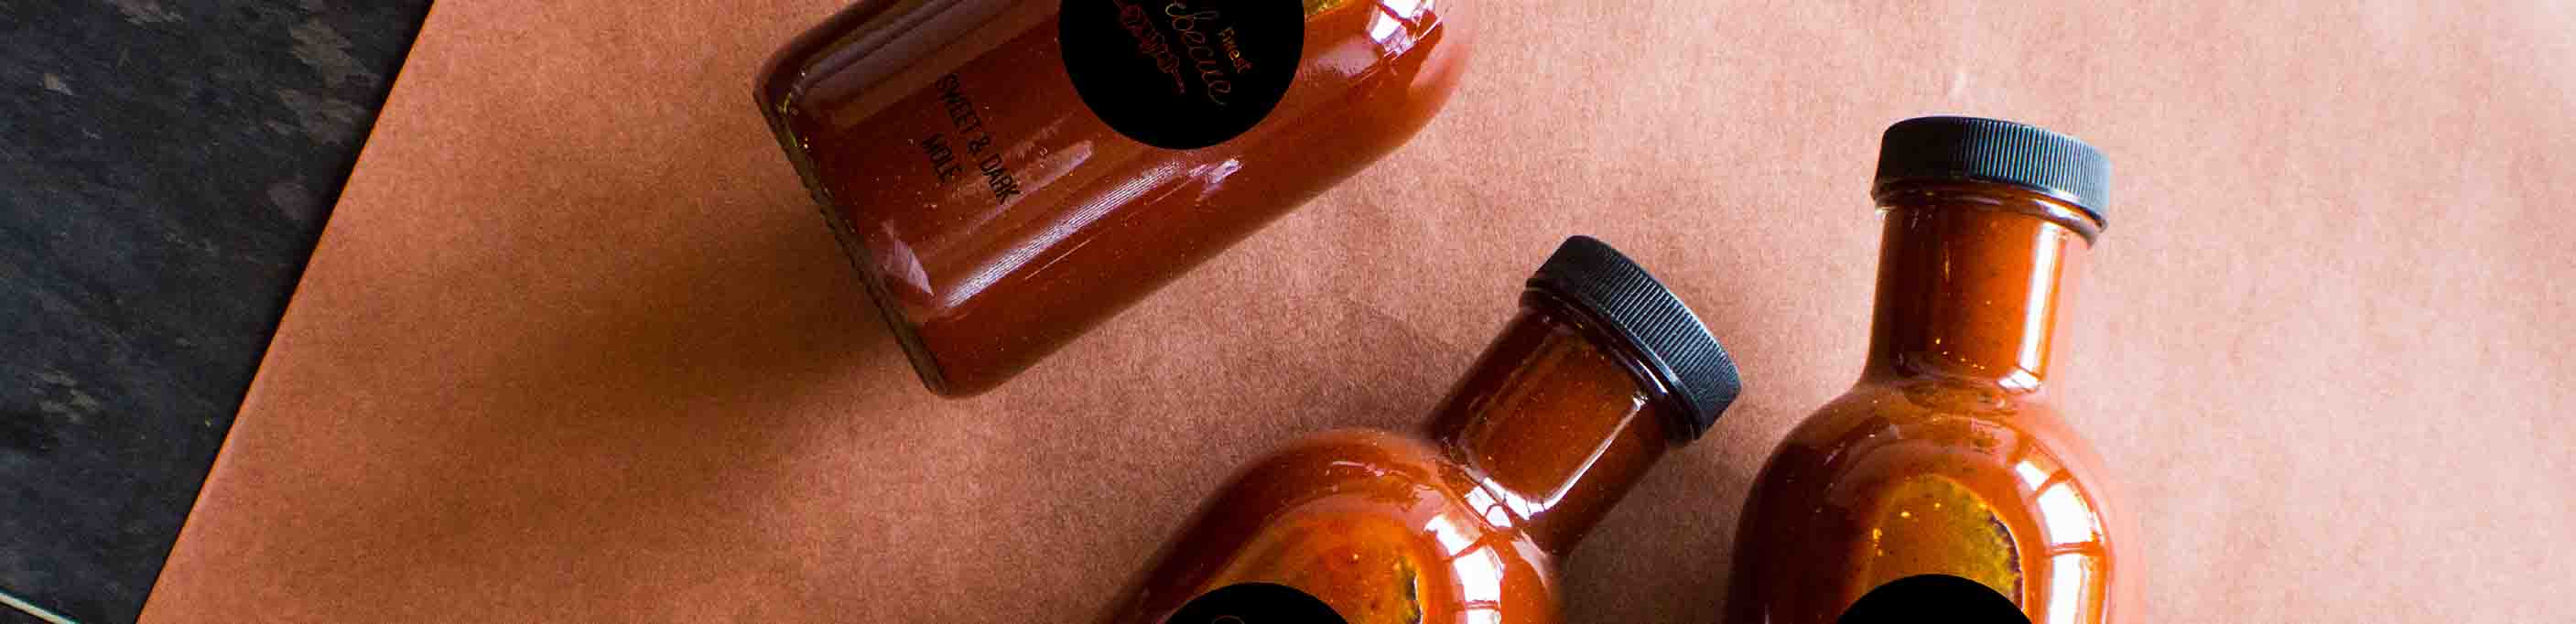 Bottles for Barbecue and Hot Sauce